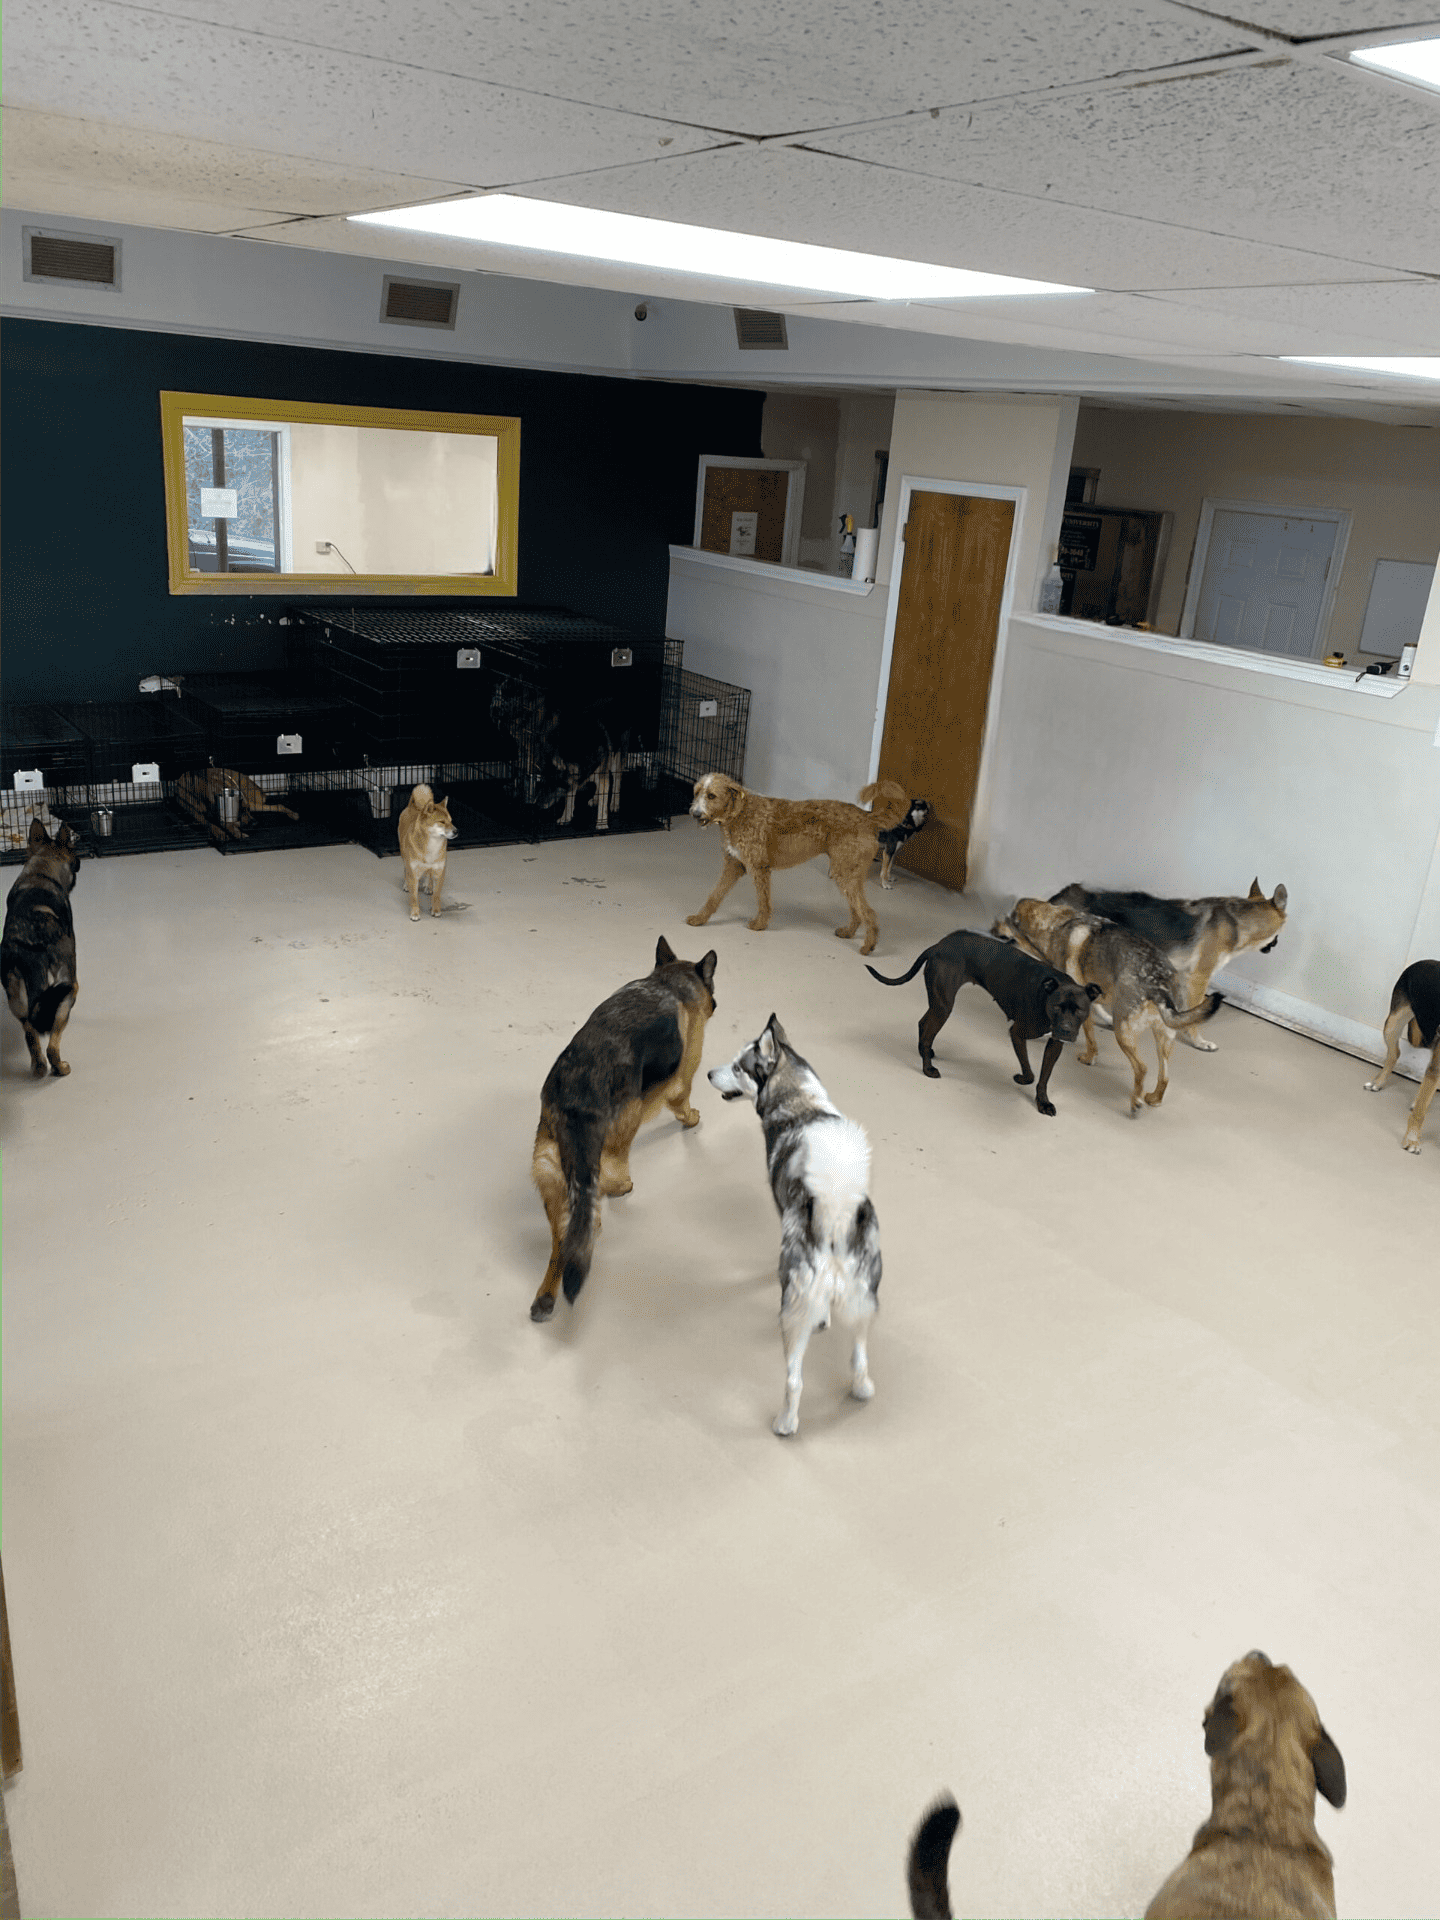 Dogs enjoying social interaction with their well-behaved dog companions inside daycare in Vienna, VA